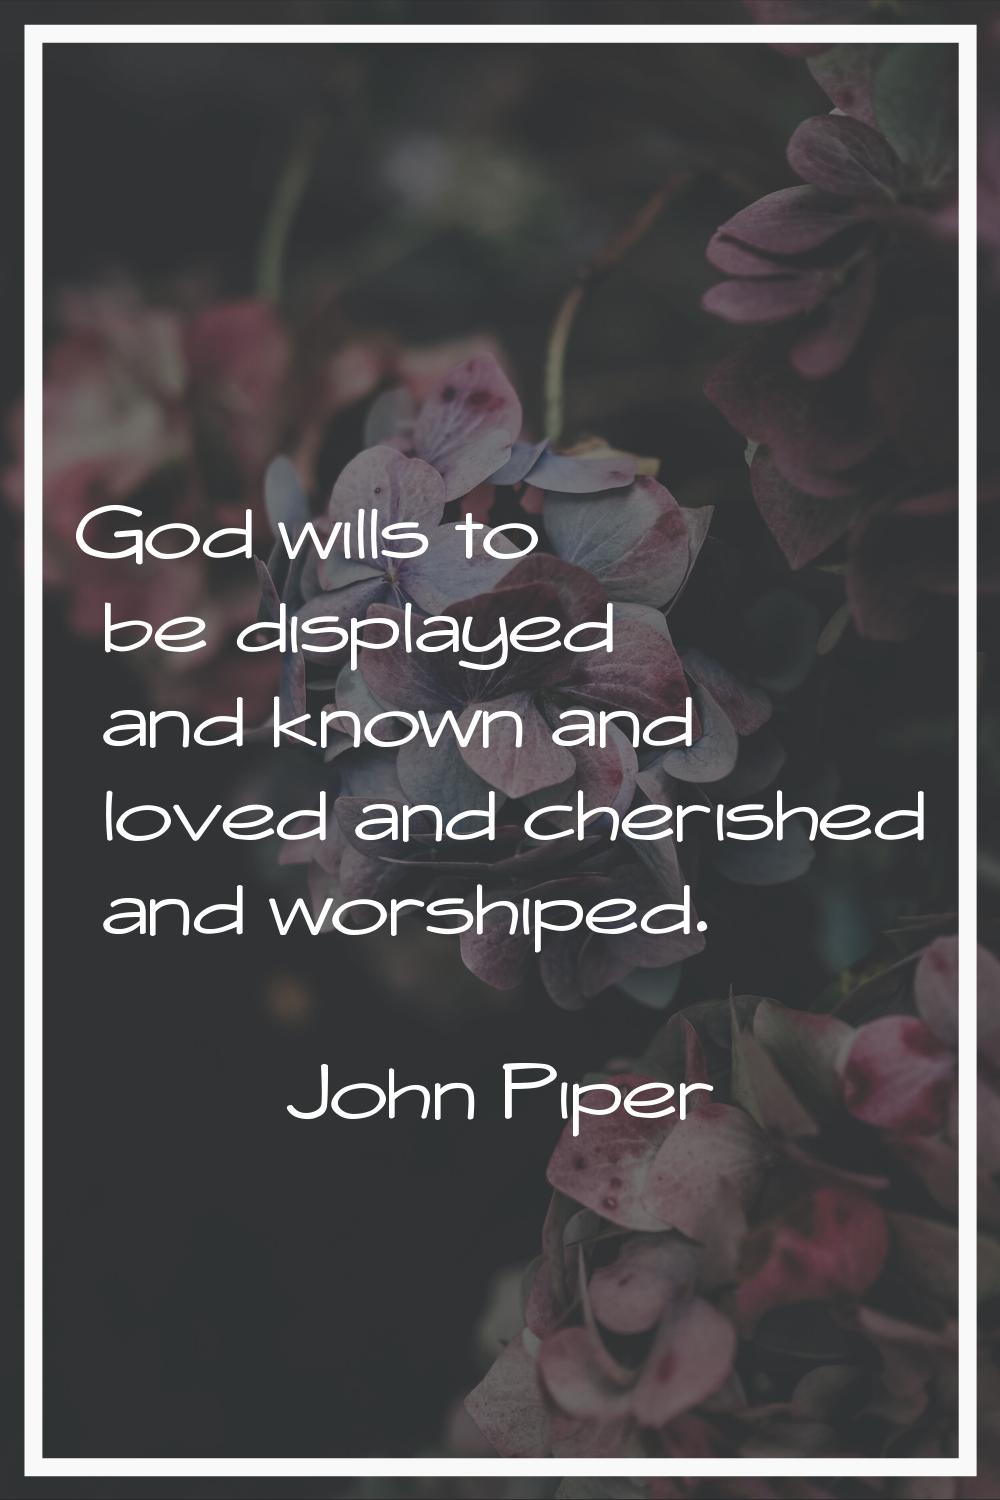 God wills to be displayed and known and loved and cherished and worshiped.